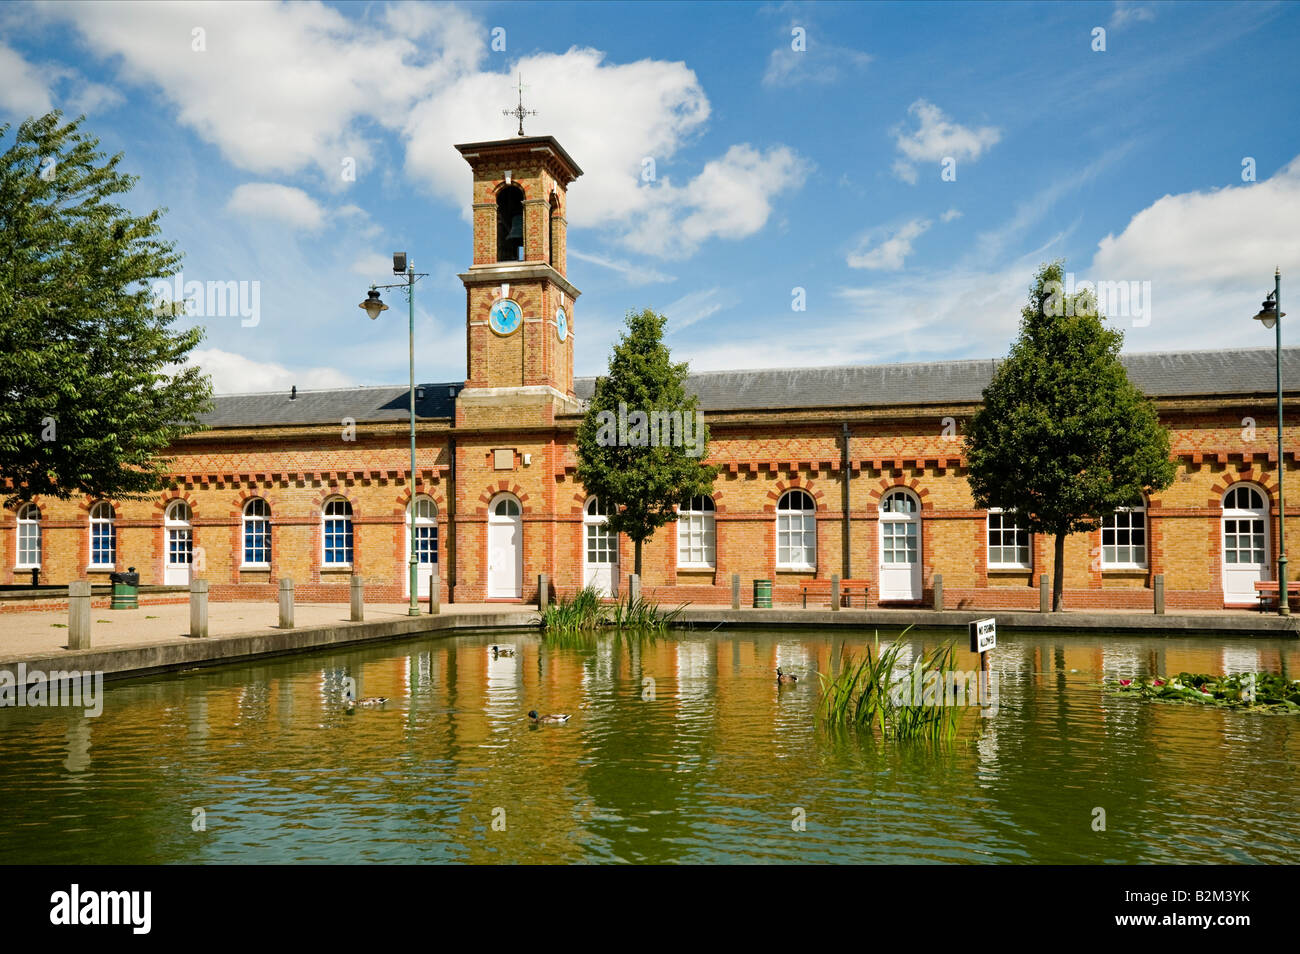 The Old Machine Room and Clock Tower of the Former Royal Small Arms Factory RSAF Enfield UK Stock Photo